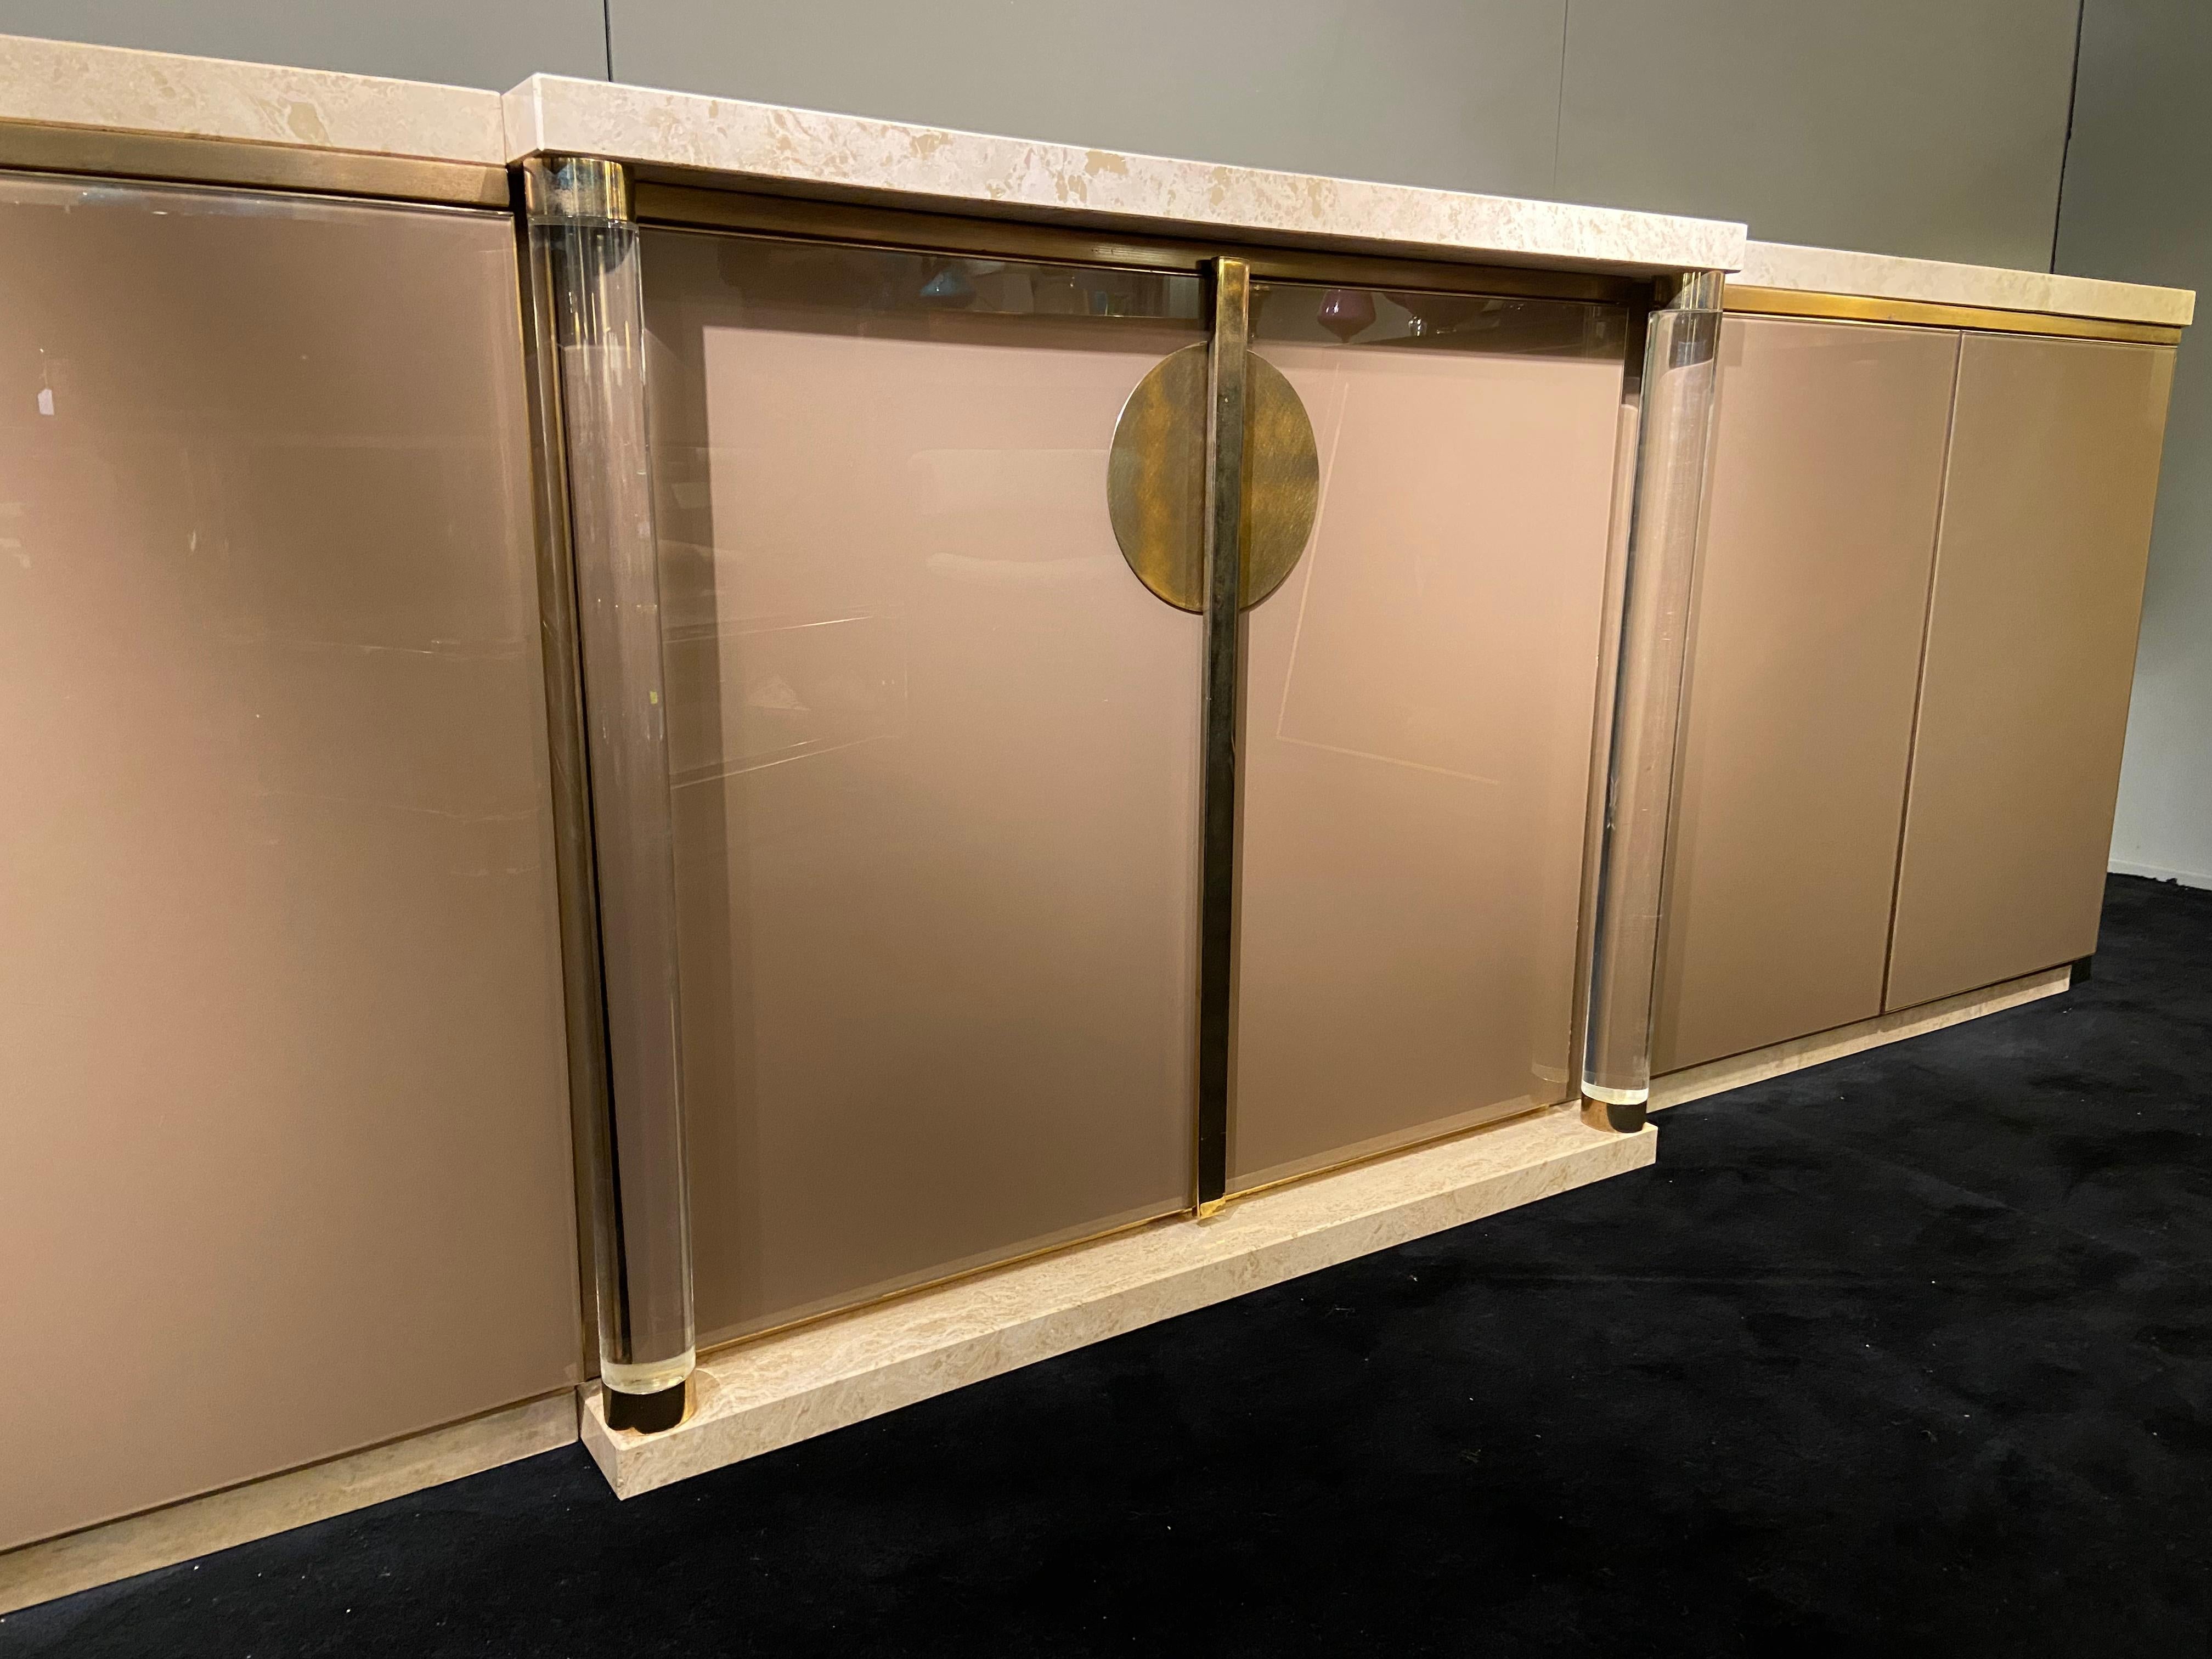 Mid-Century Modern Lacquered Sideboard, Travertine and Plexiglass, Belgo Chrom, 1970s For Sale